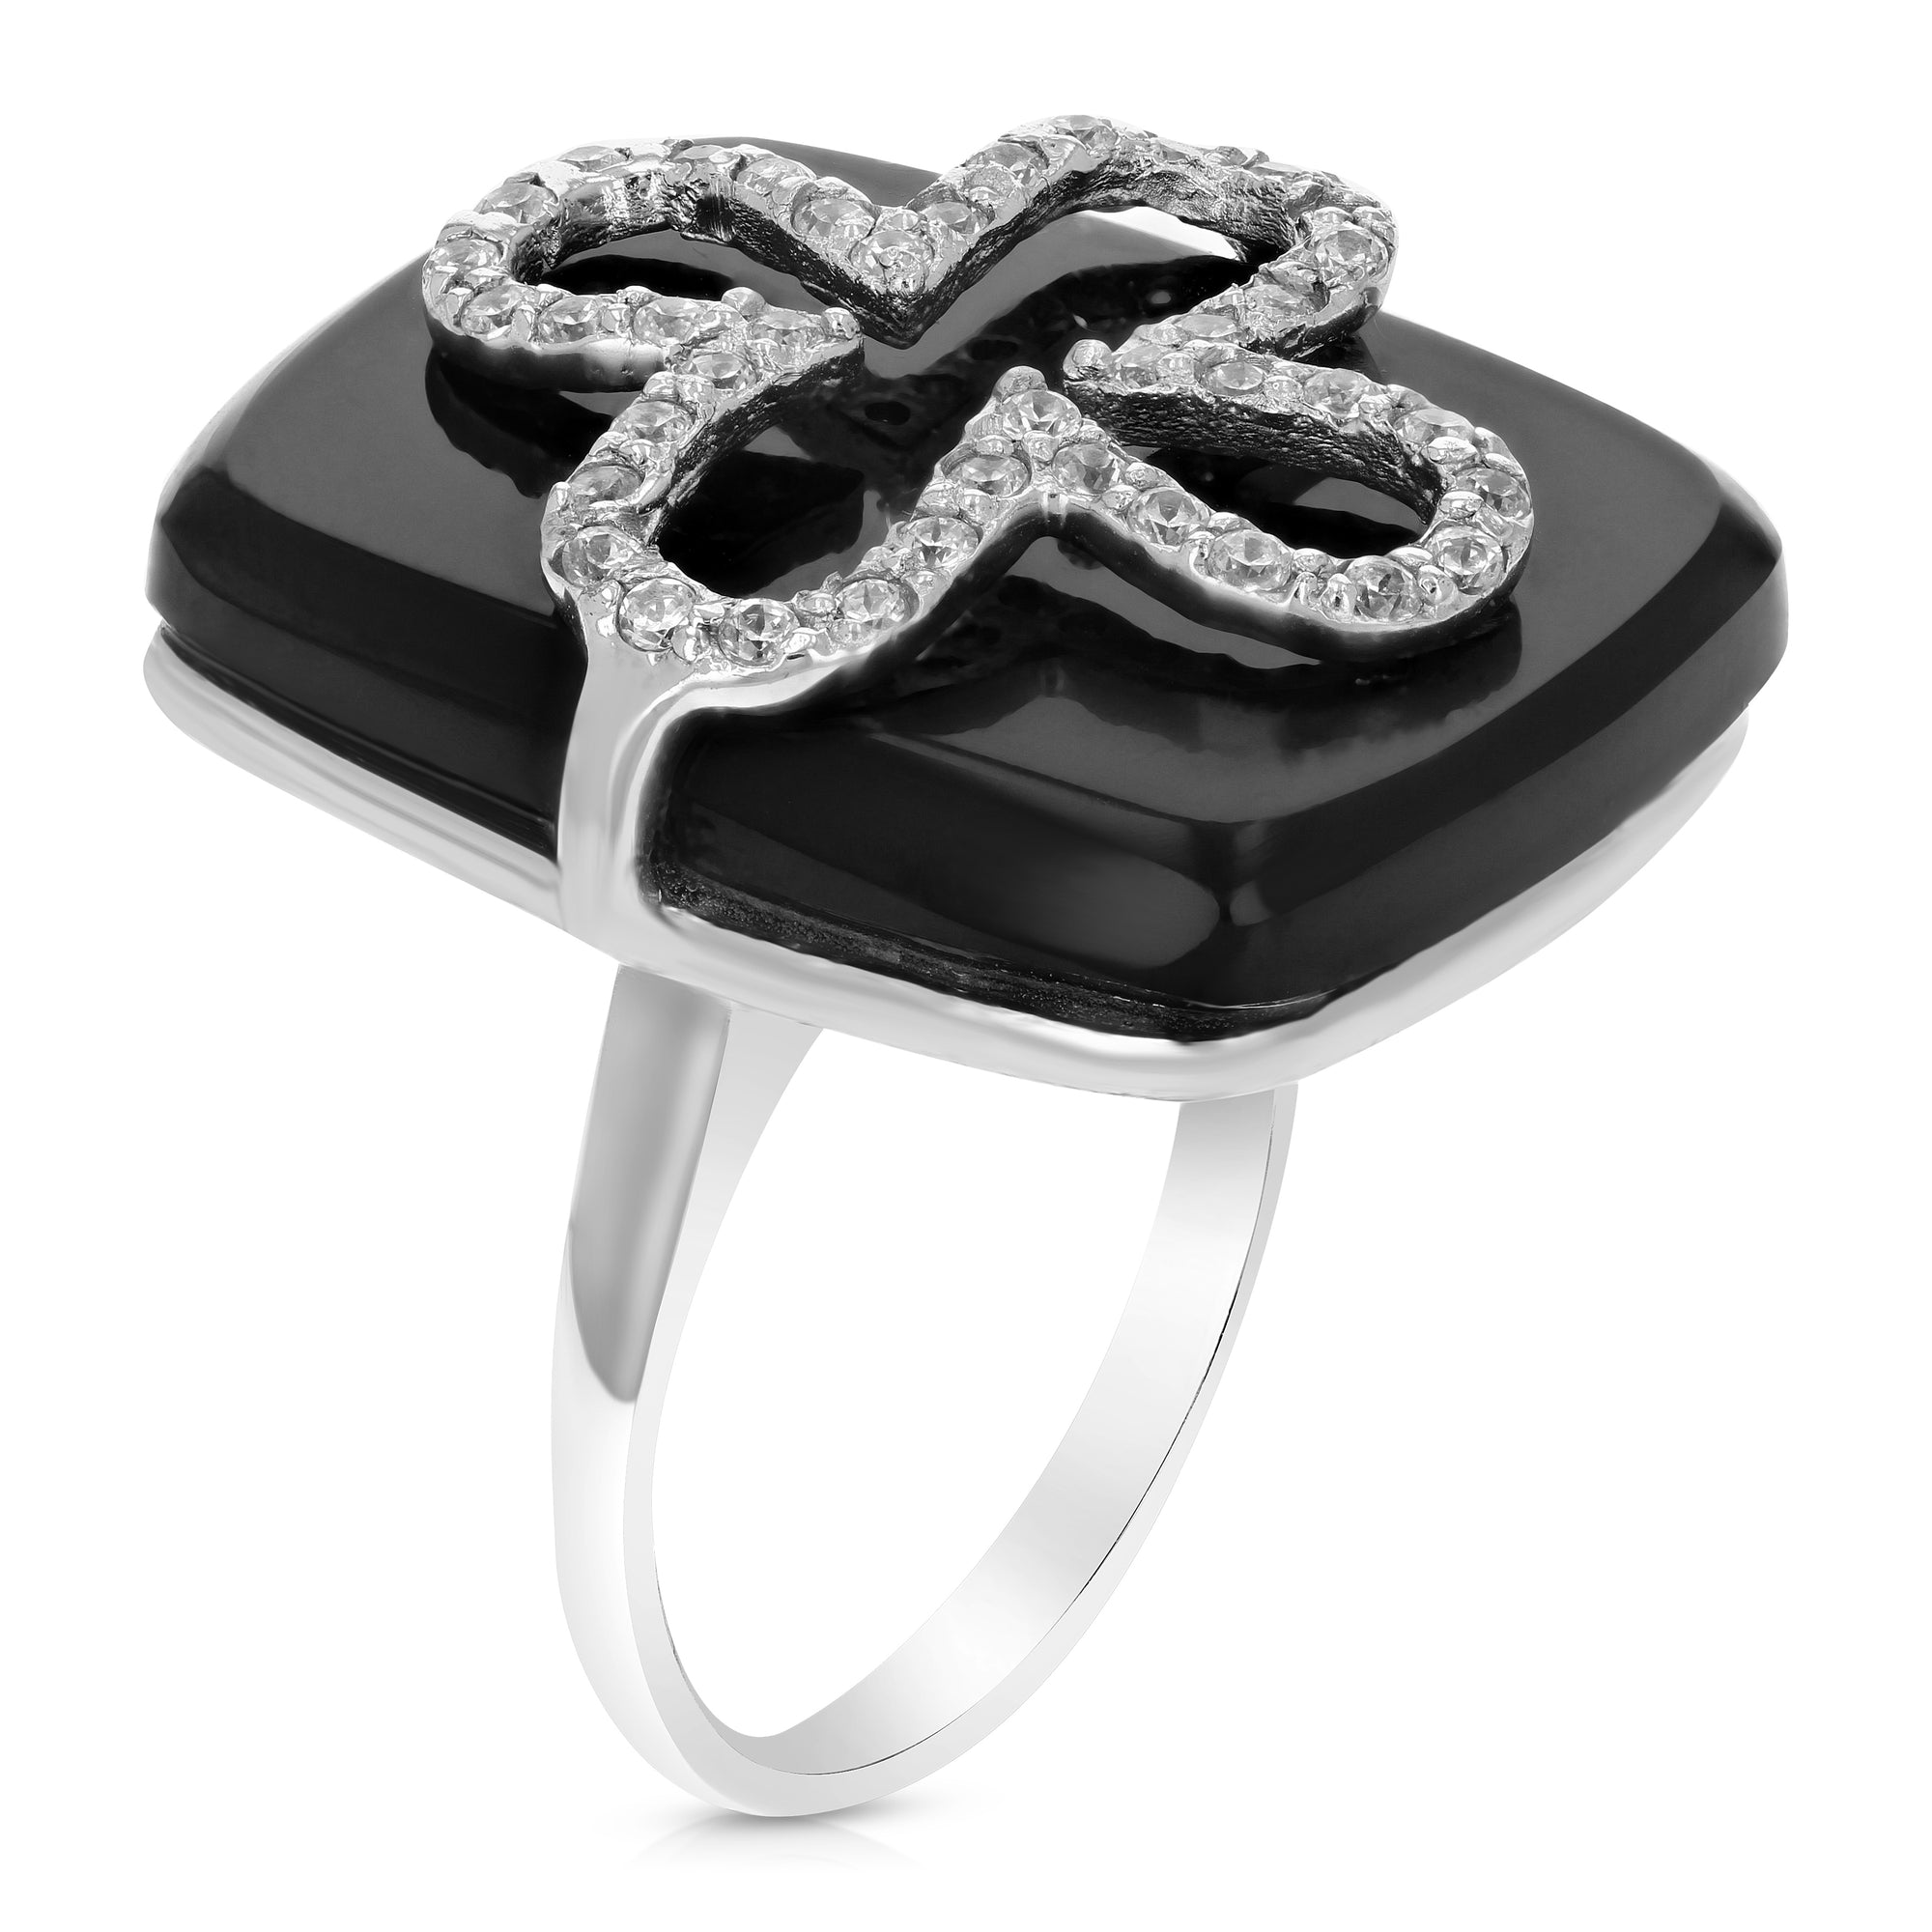 10 cttw Black Onyx Ring .925 Sterling Silver with Rhodium Plating Emerald Shape